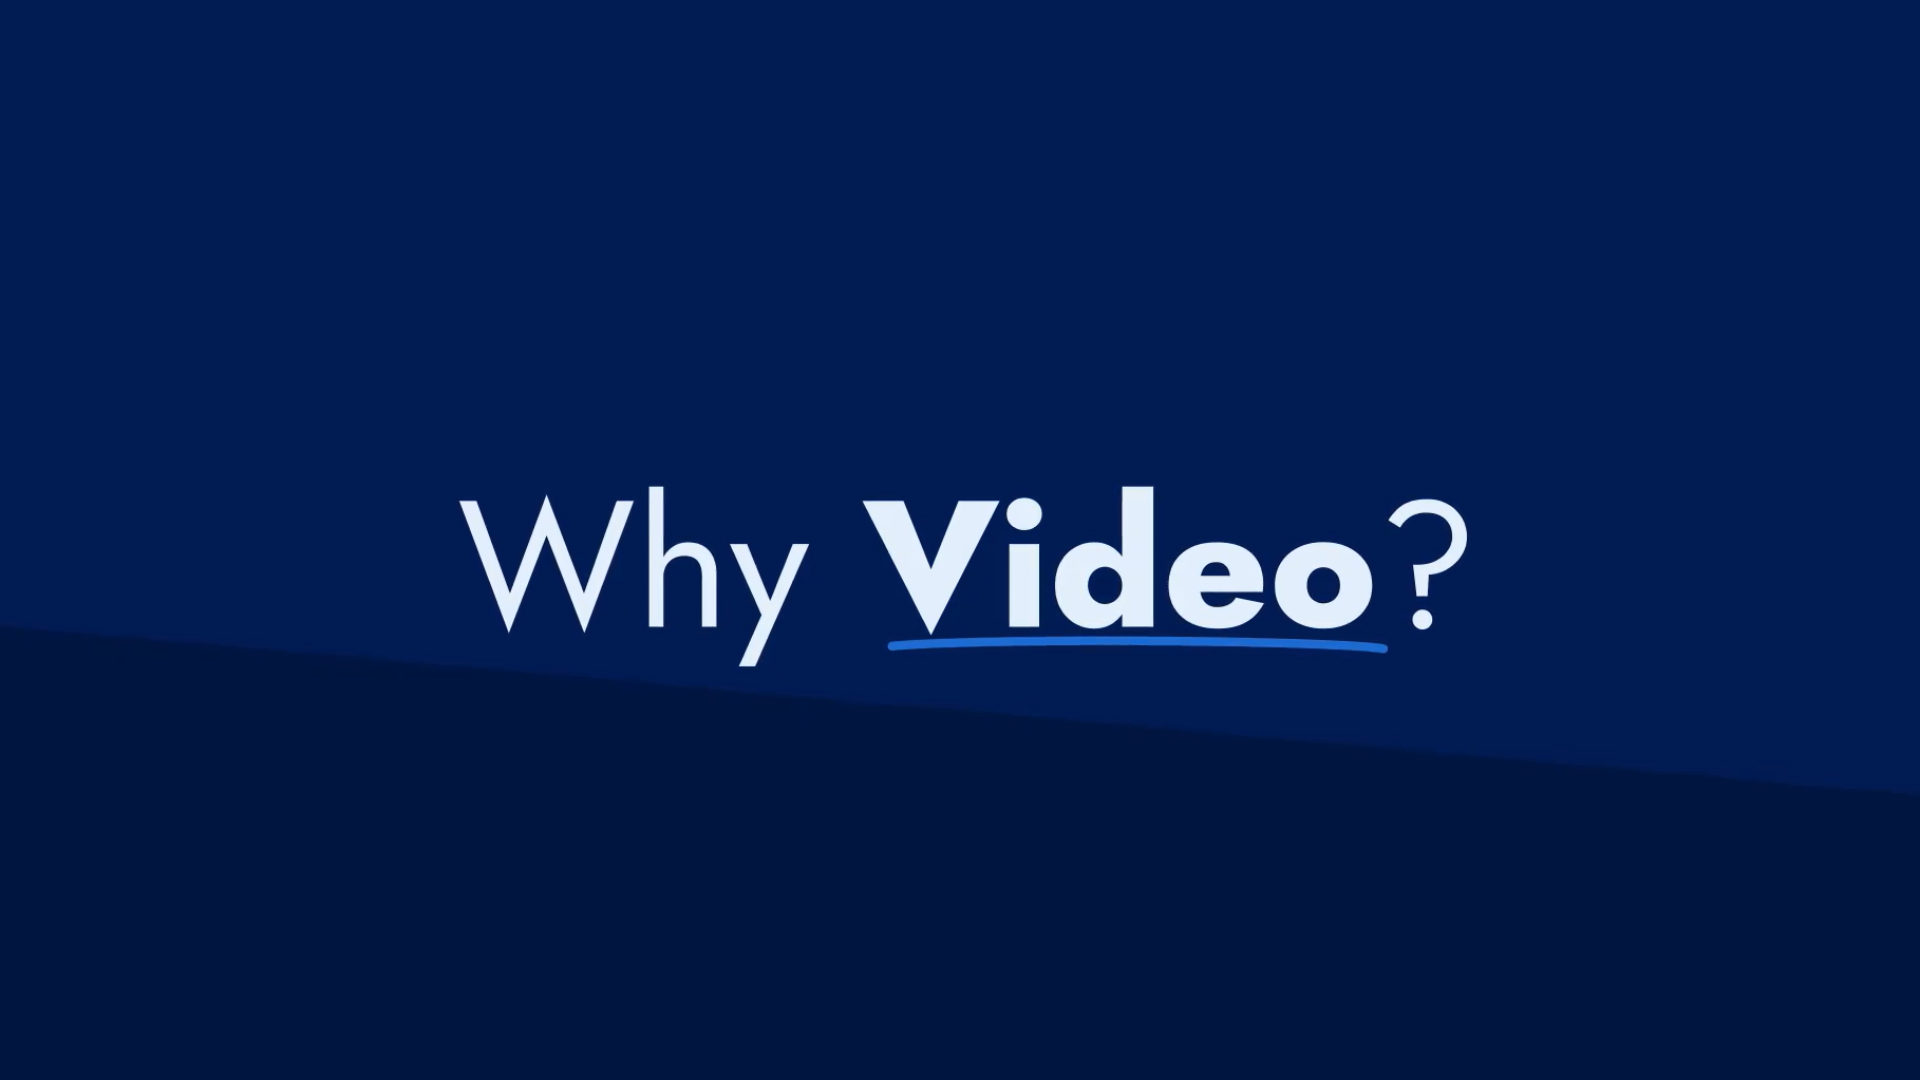 Why Video? - Automotive